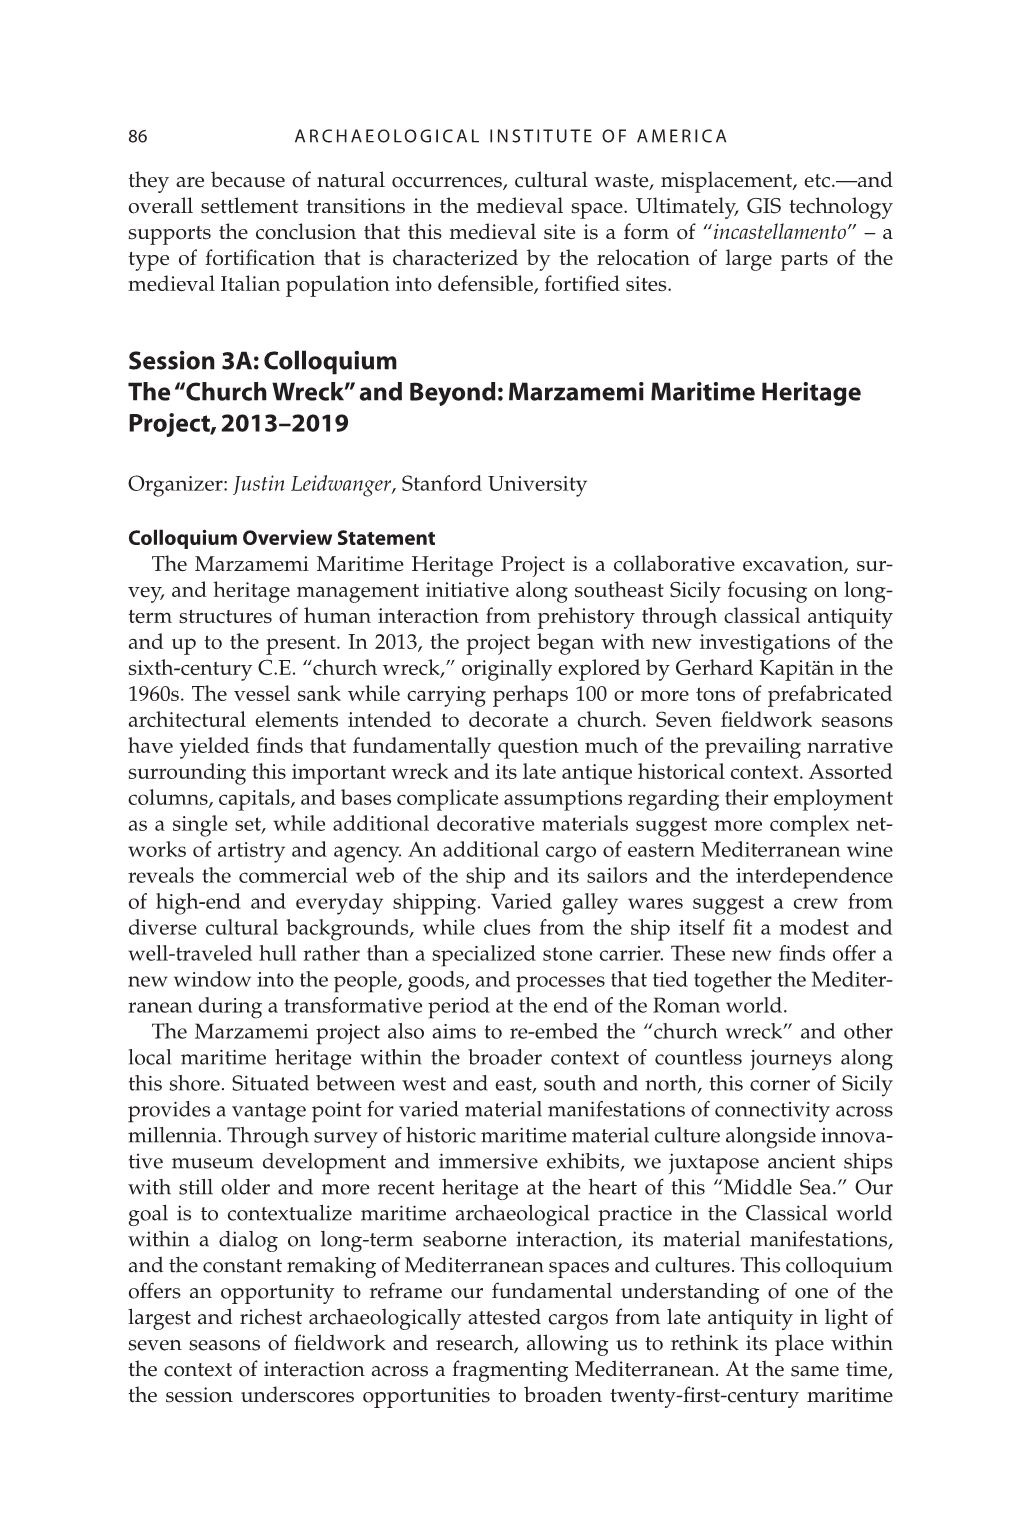 Session 3A: Colloquium the “Church Wreck” and Beyond: Marzamemi Maritime Heritage Project, 2013–2019